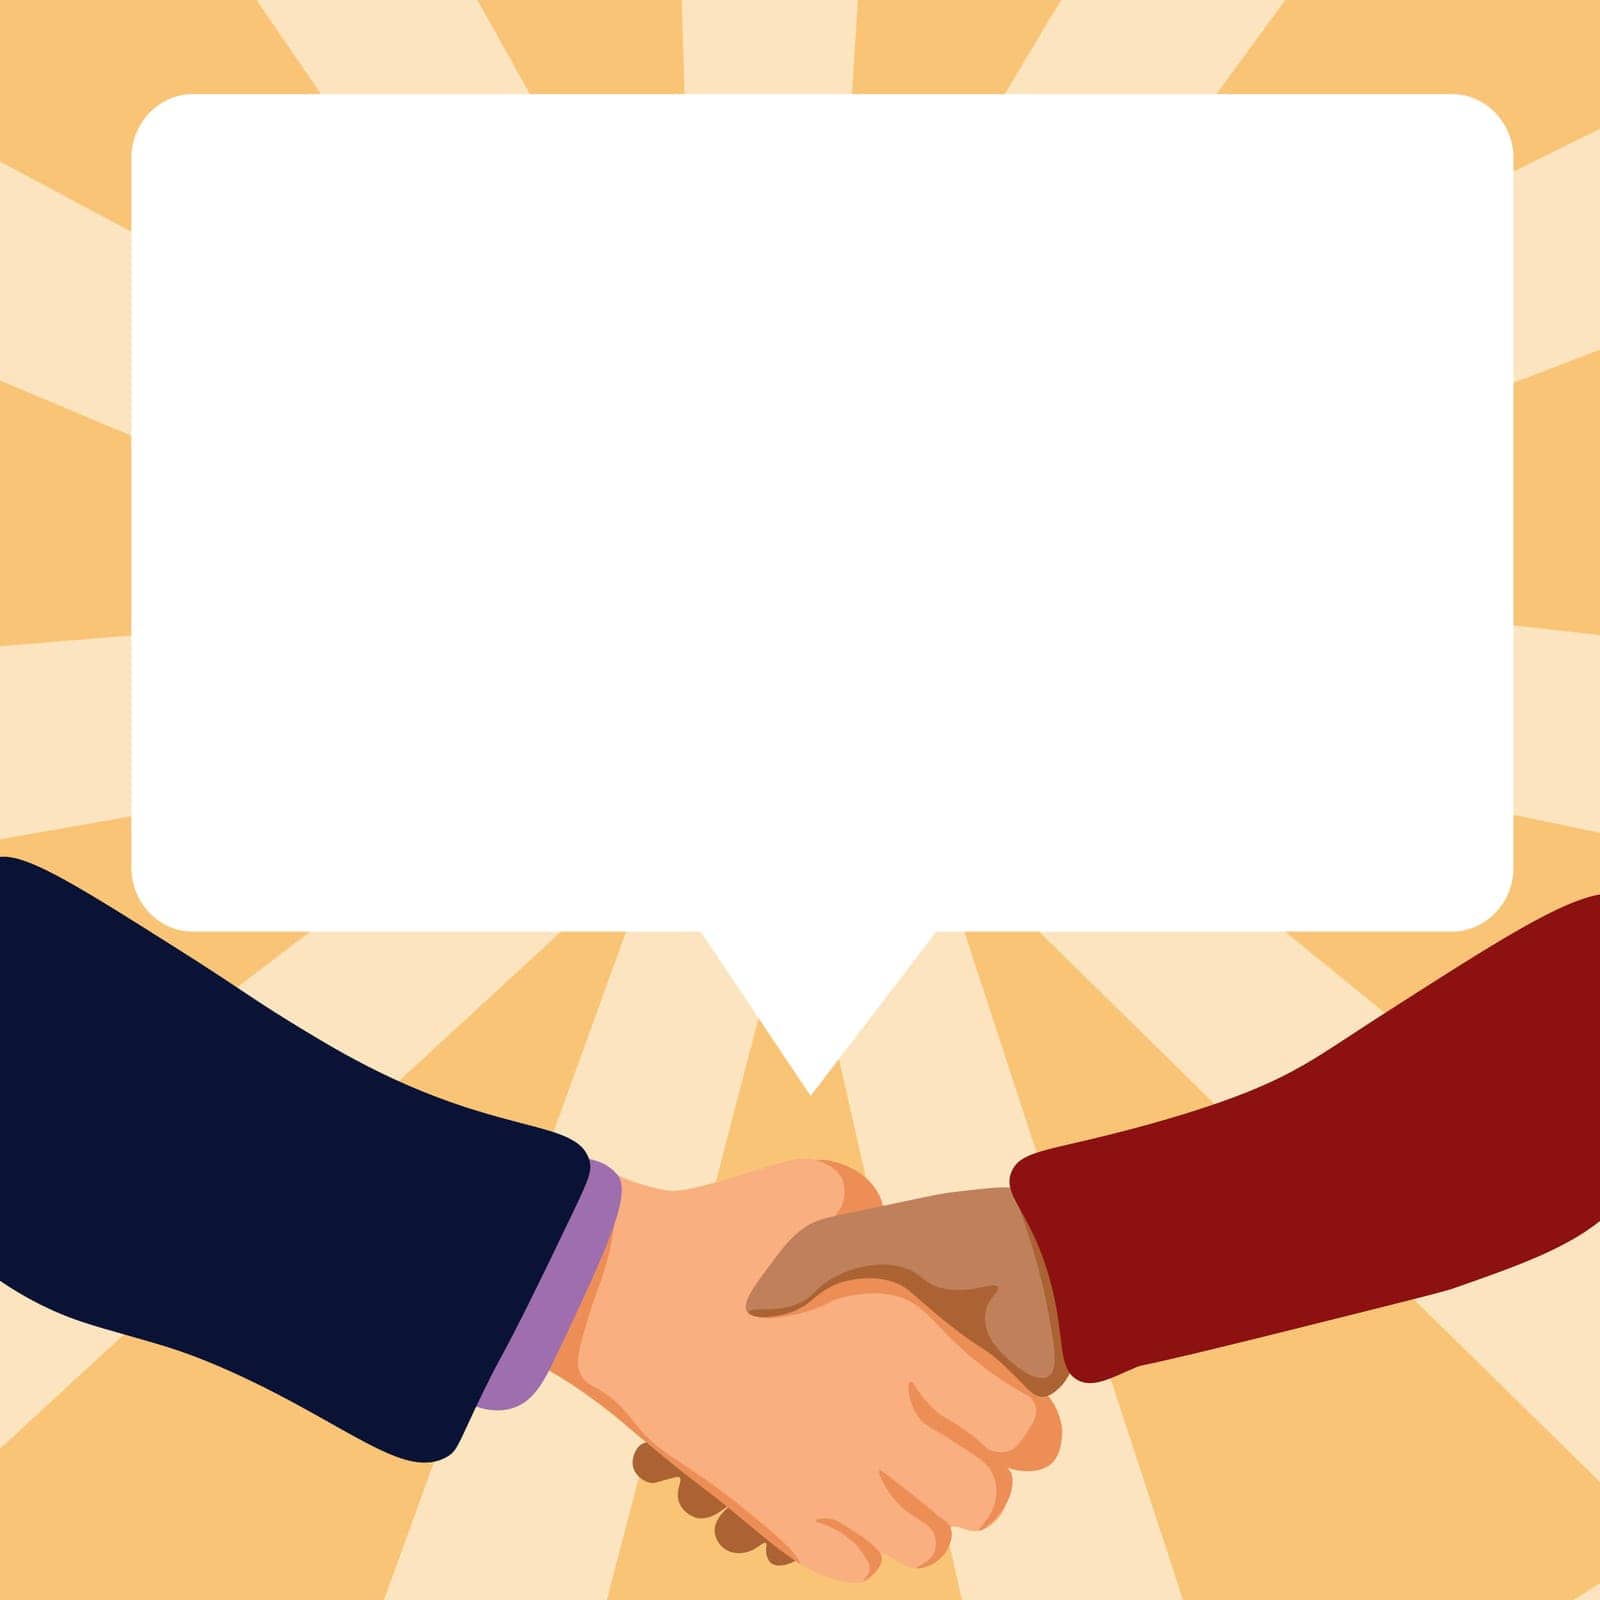 Handshake on colored background. Speech bubble with important information.